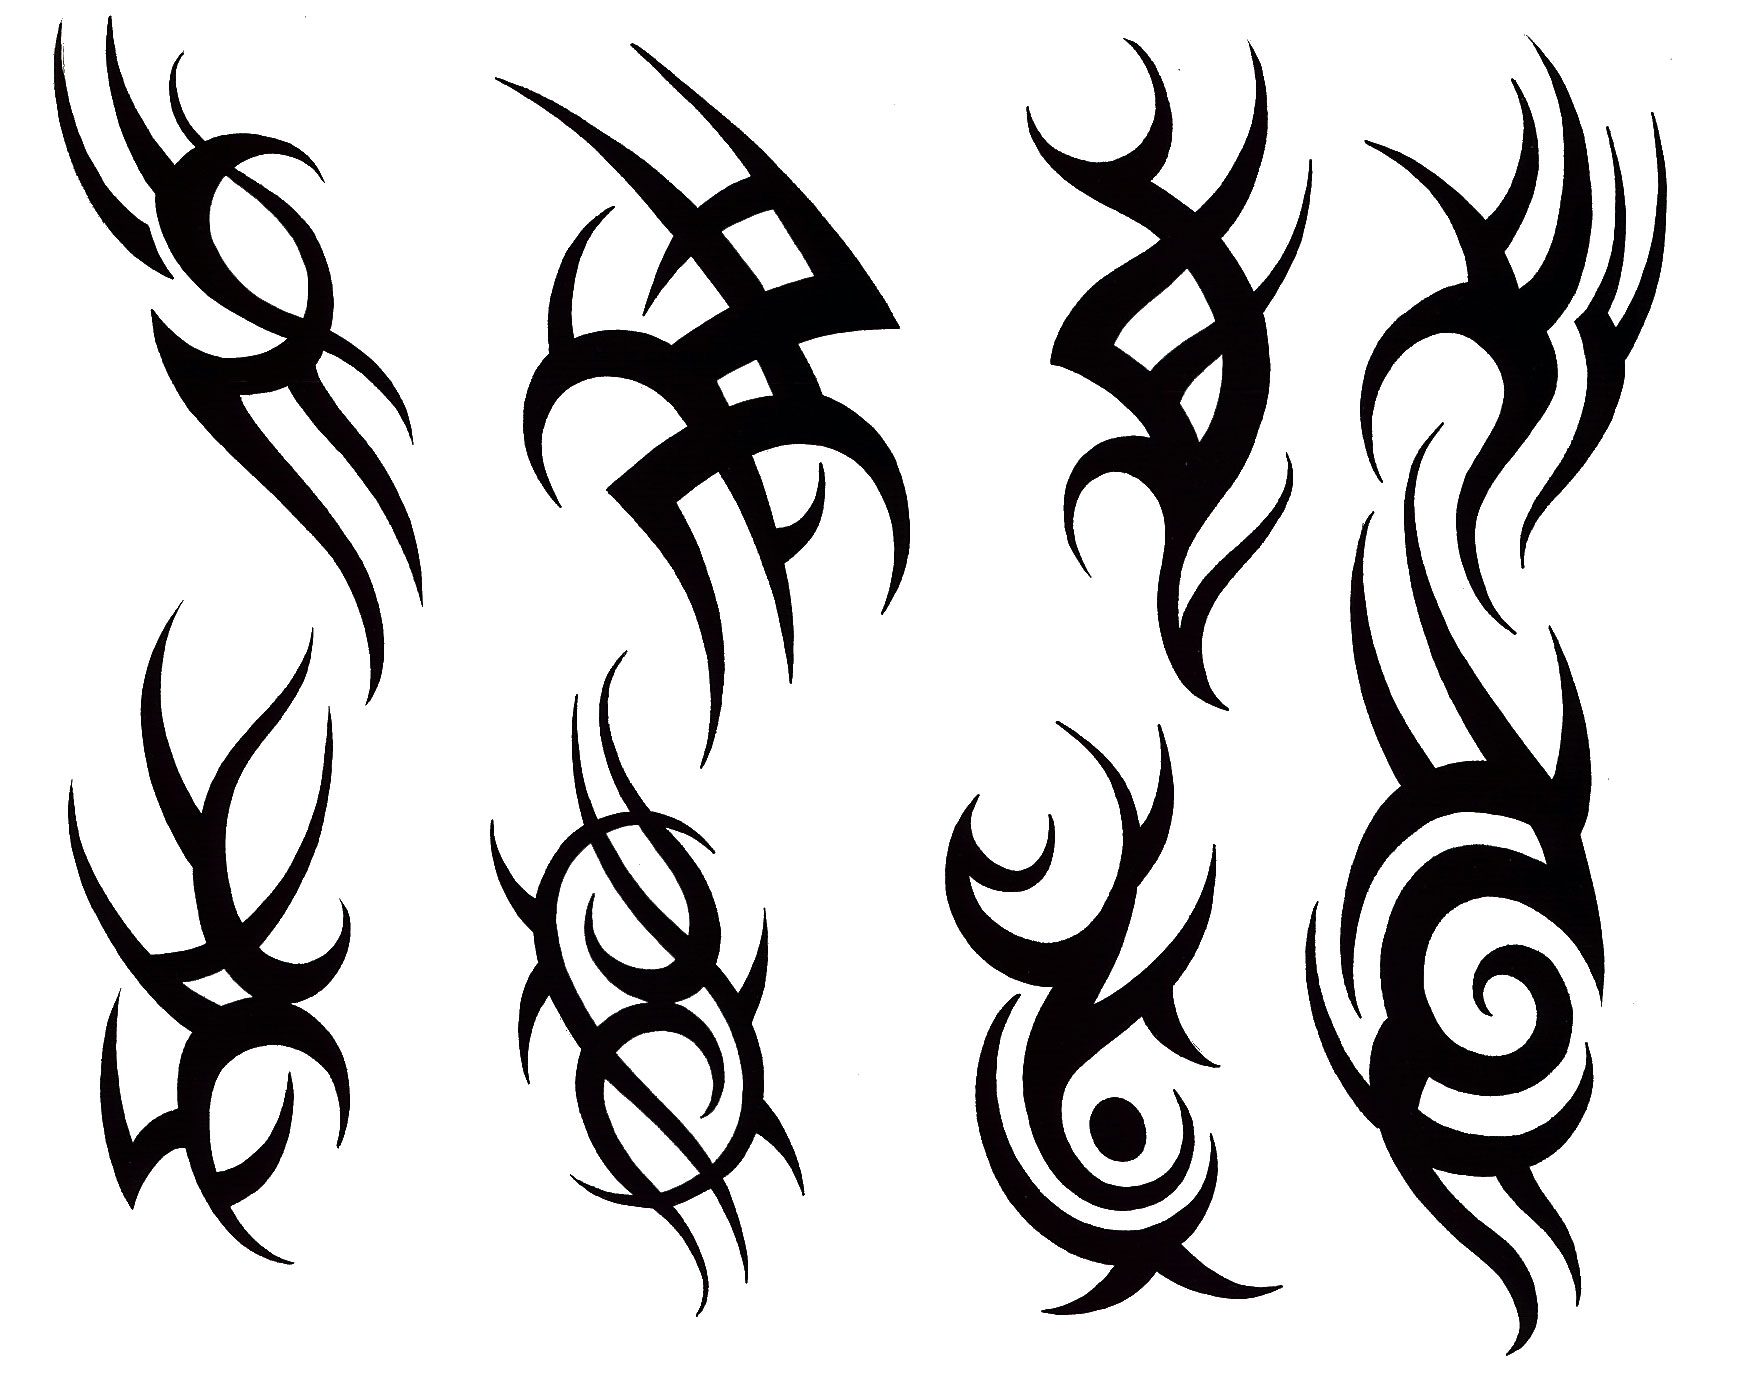 Free Simple Tattoo Designs To Draw For Men Download Free Clip Art Free Clip Art On Clipart Library,Passive Solar Home Design Plans